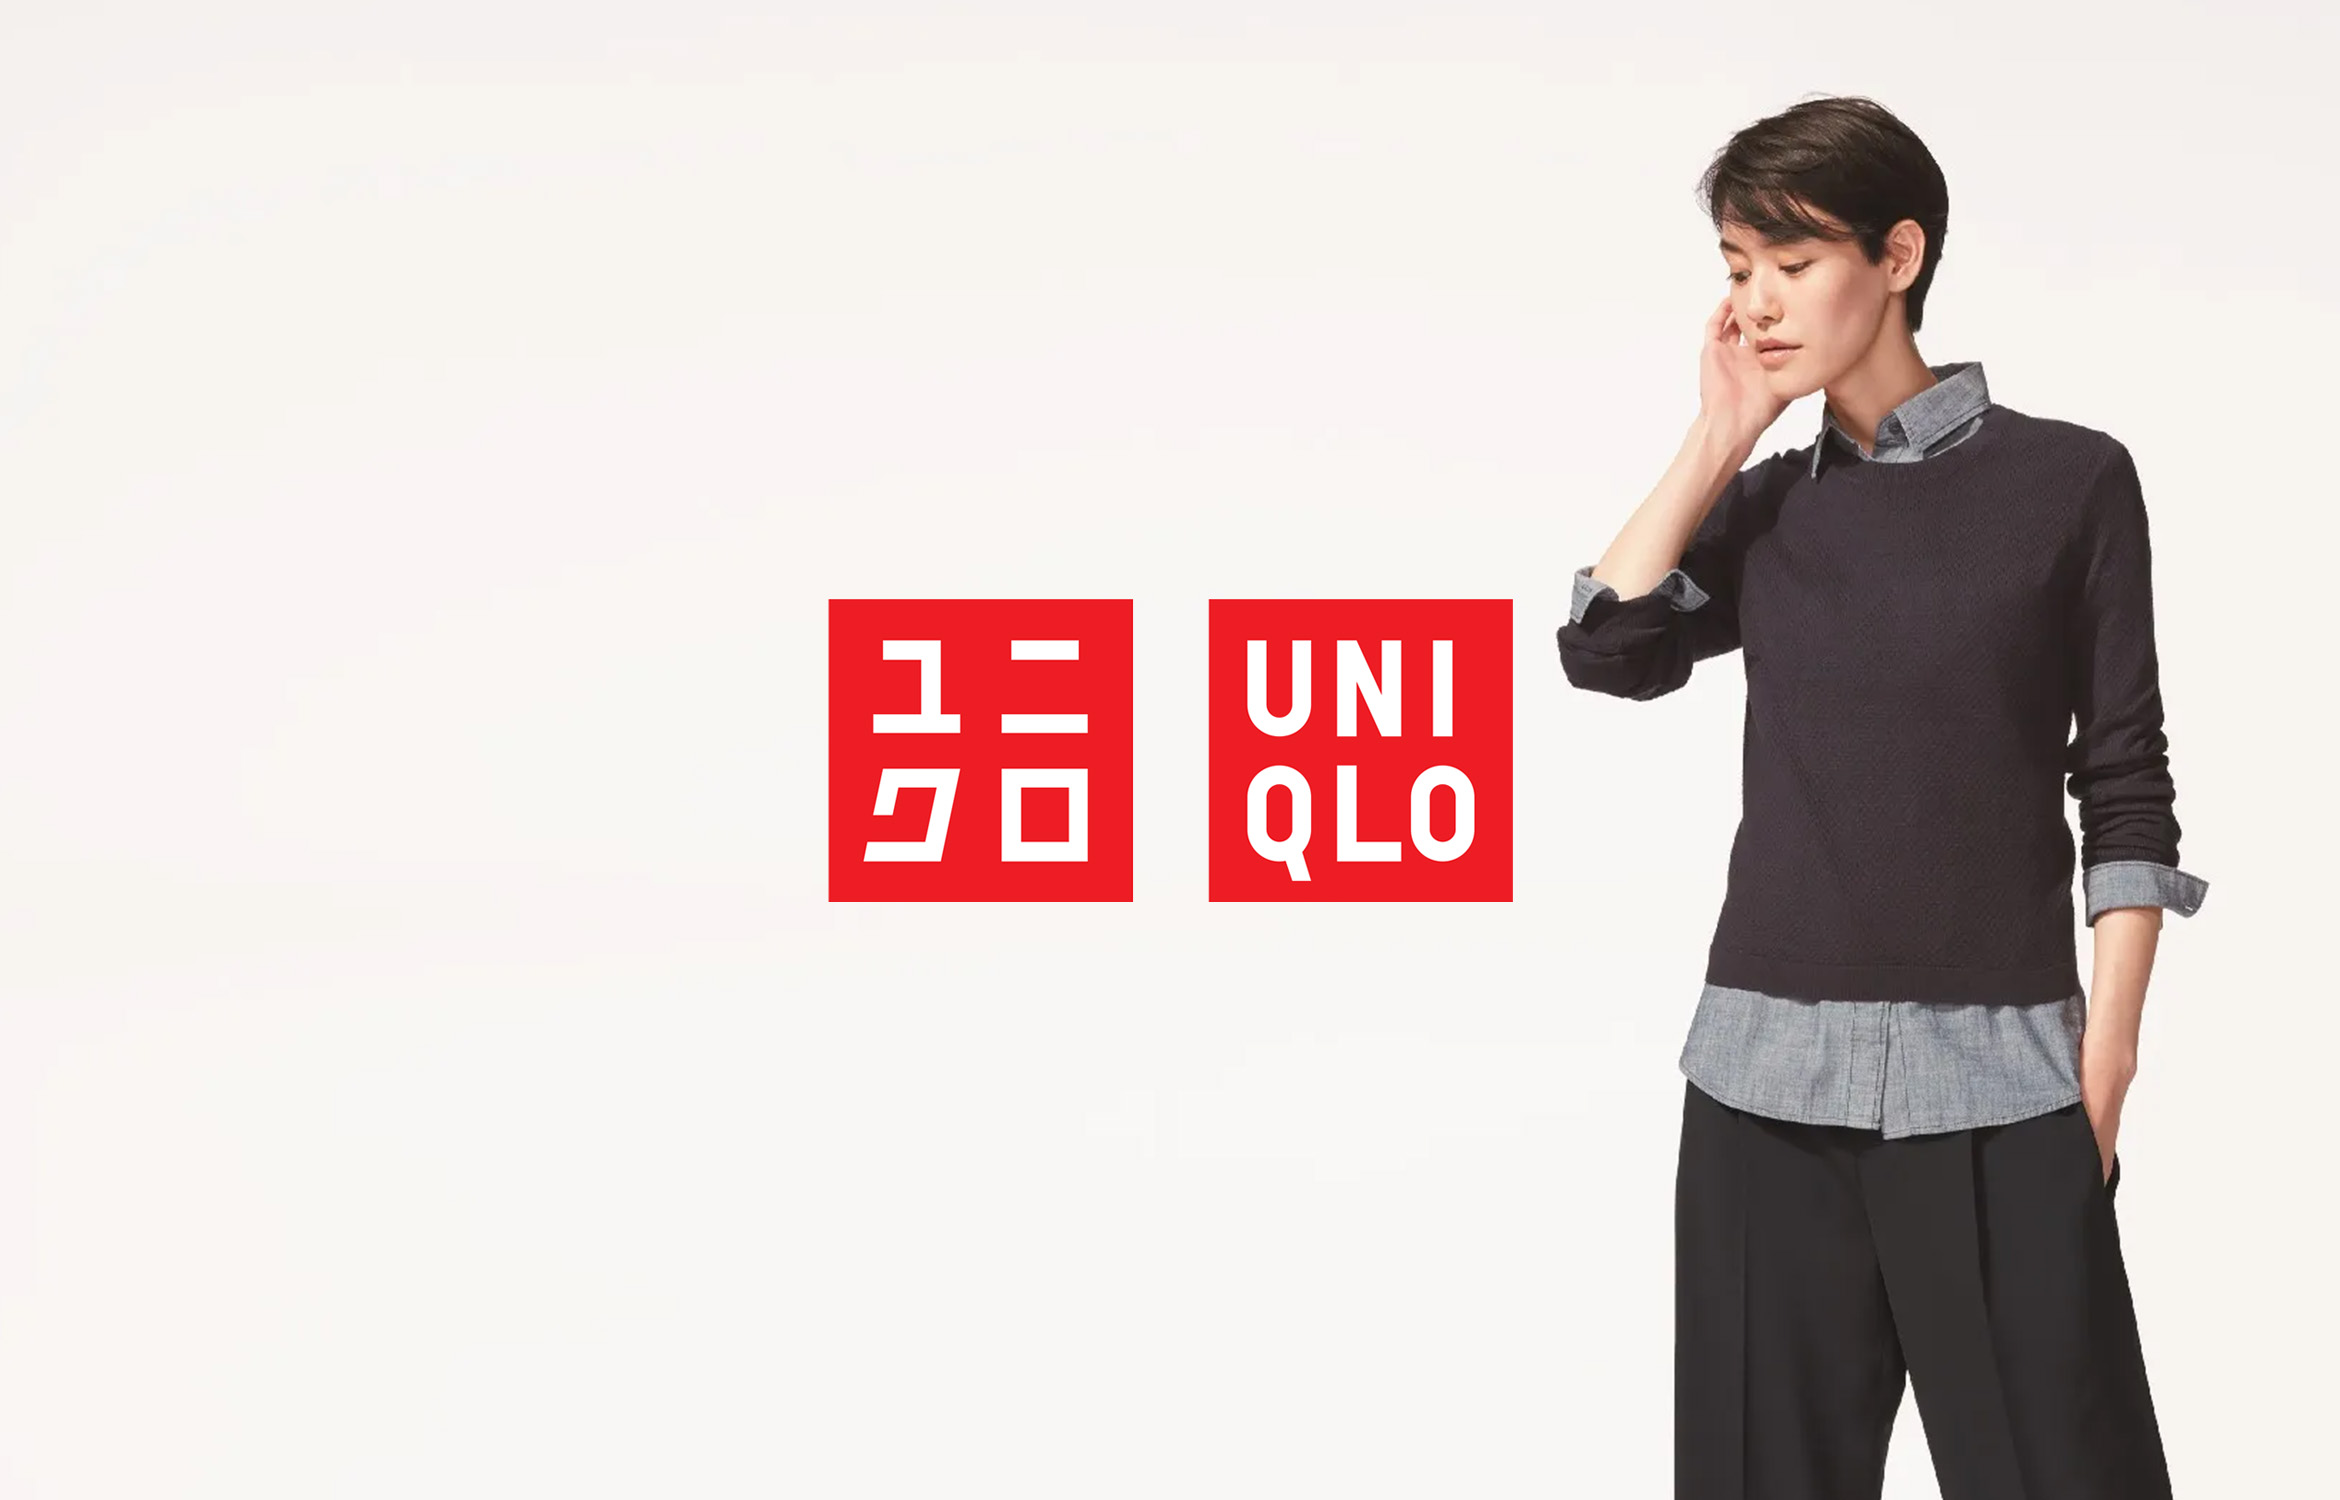 Visualising Uniqlo’s Special Collections